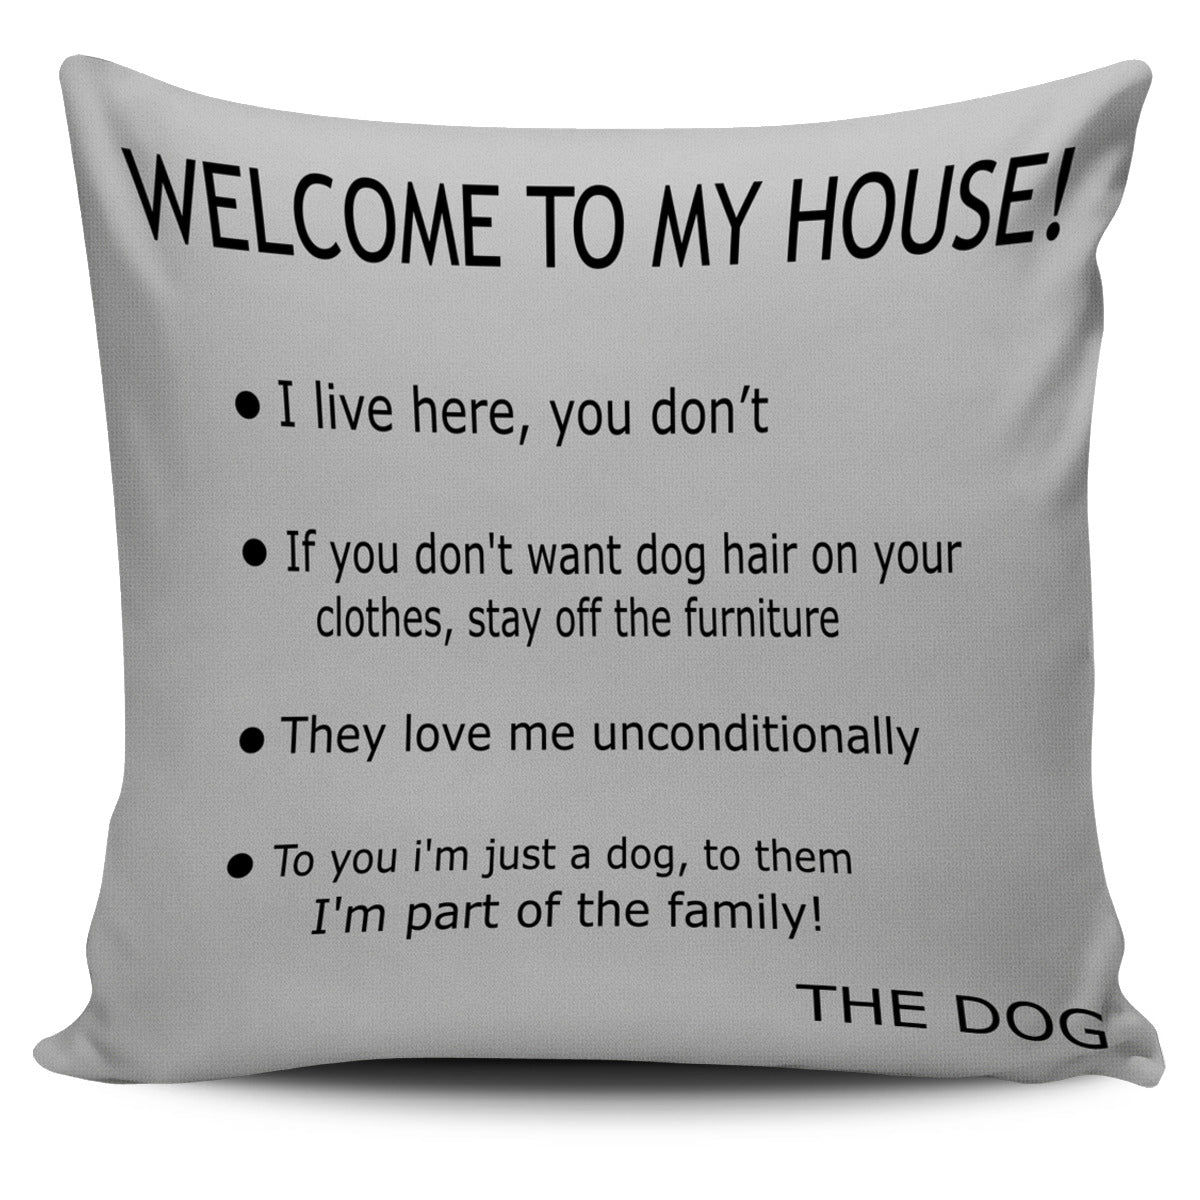 Pillow Cover - Dog's House - Grey